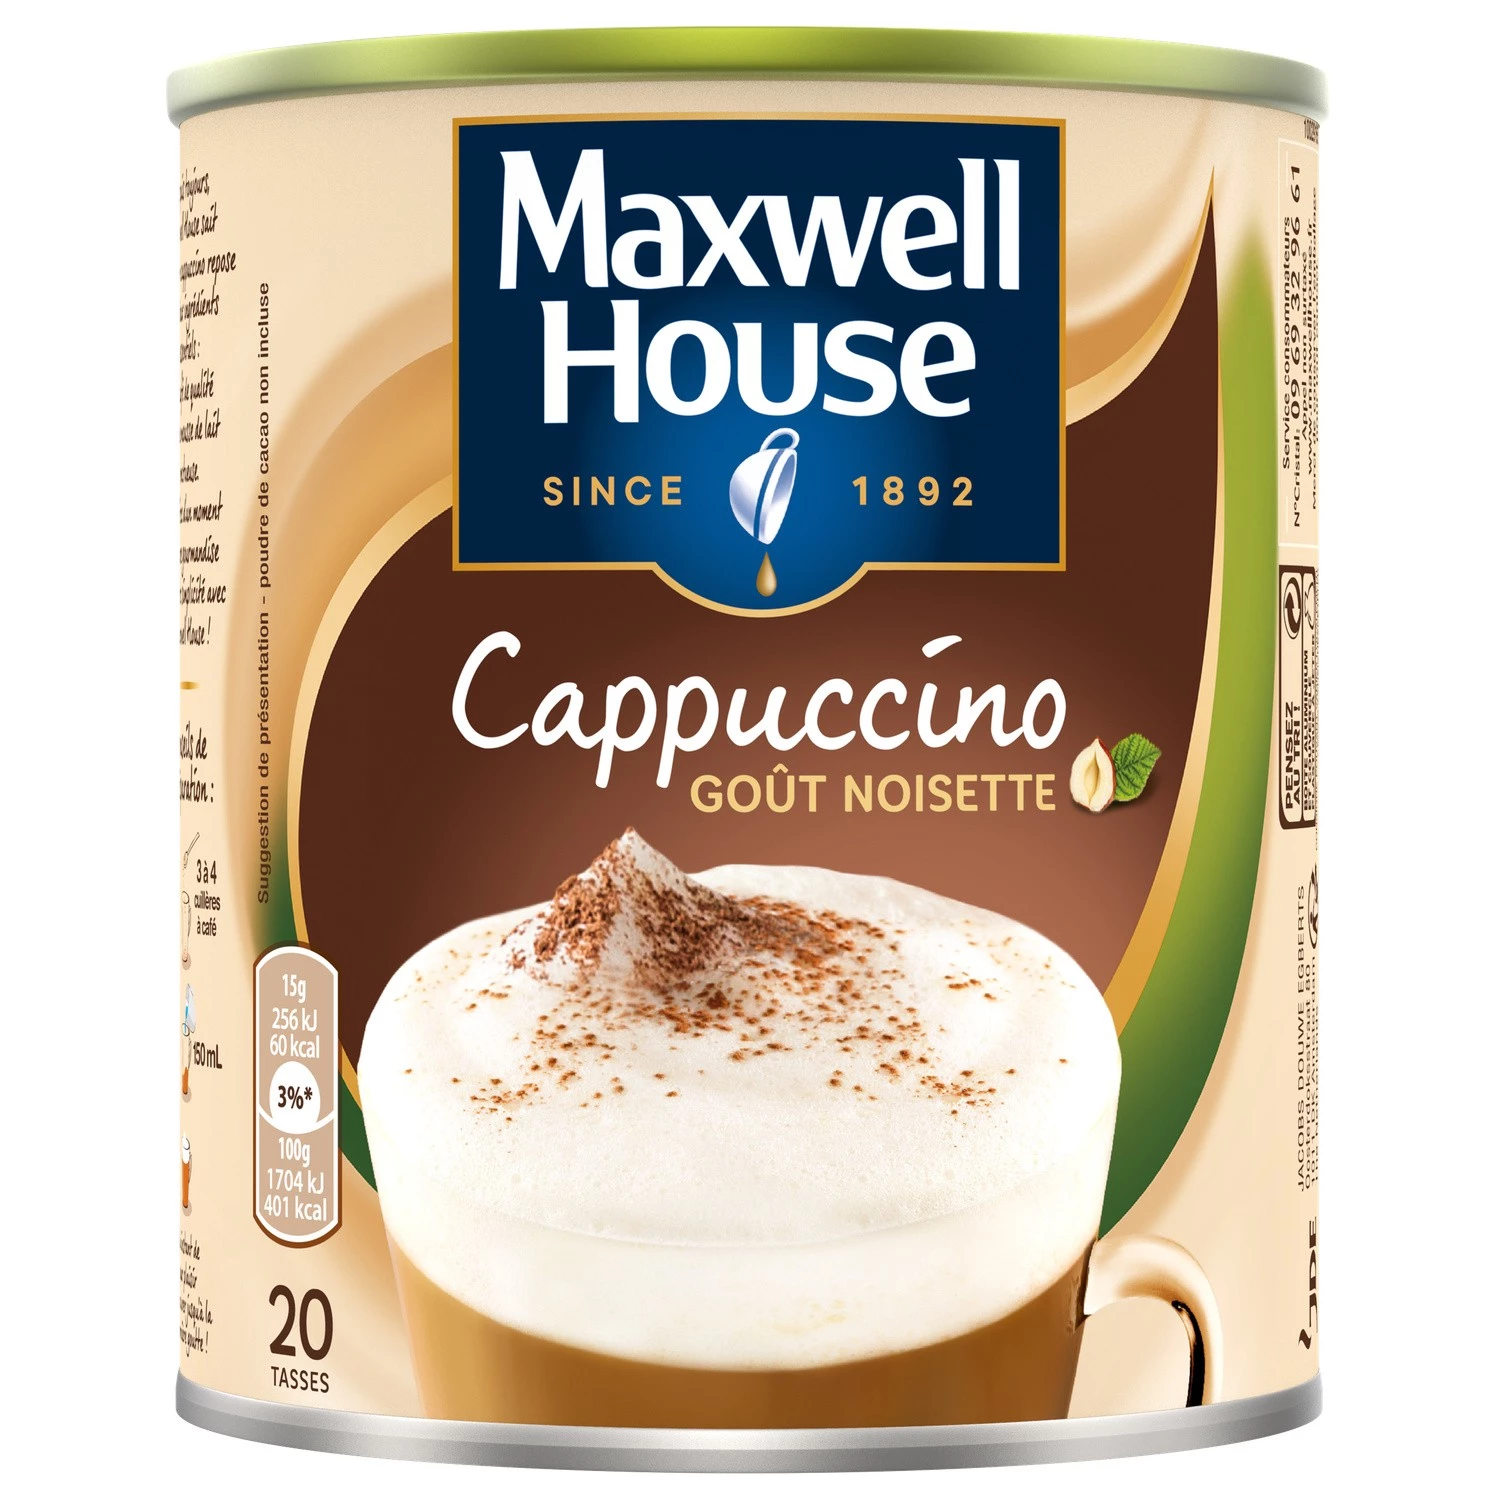 Cappuccino soluble goût noisette 305g - MAXWELL HOUSE